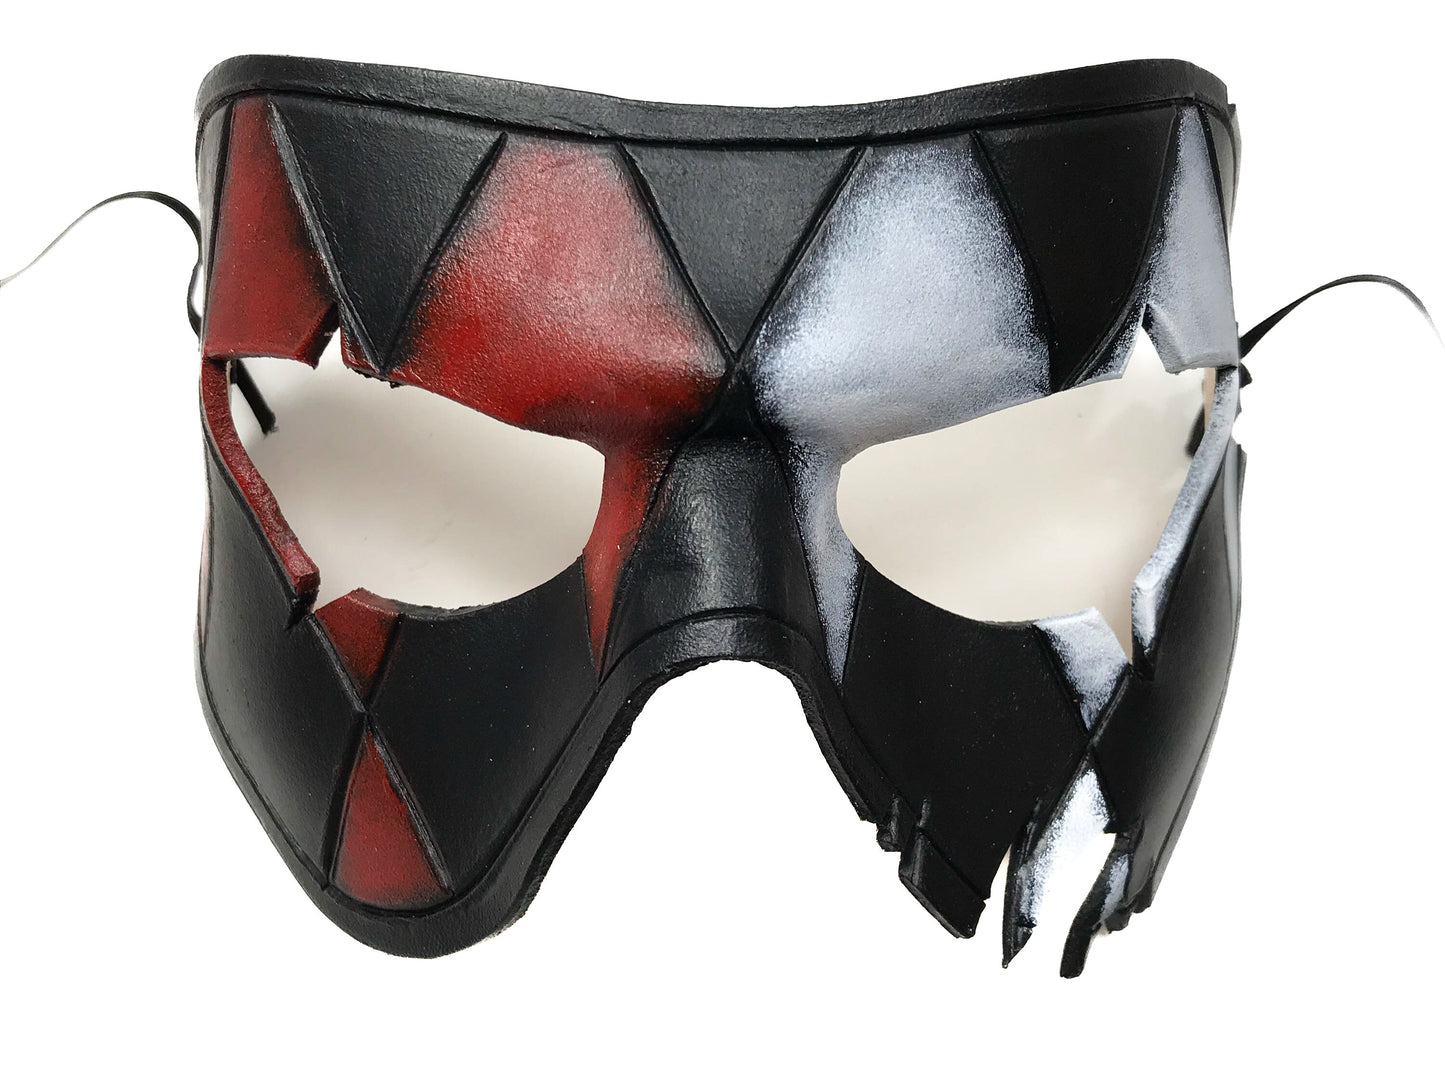 Harlequin Handmade Genuine Leather Mask in Red White Black and Gold